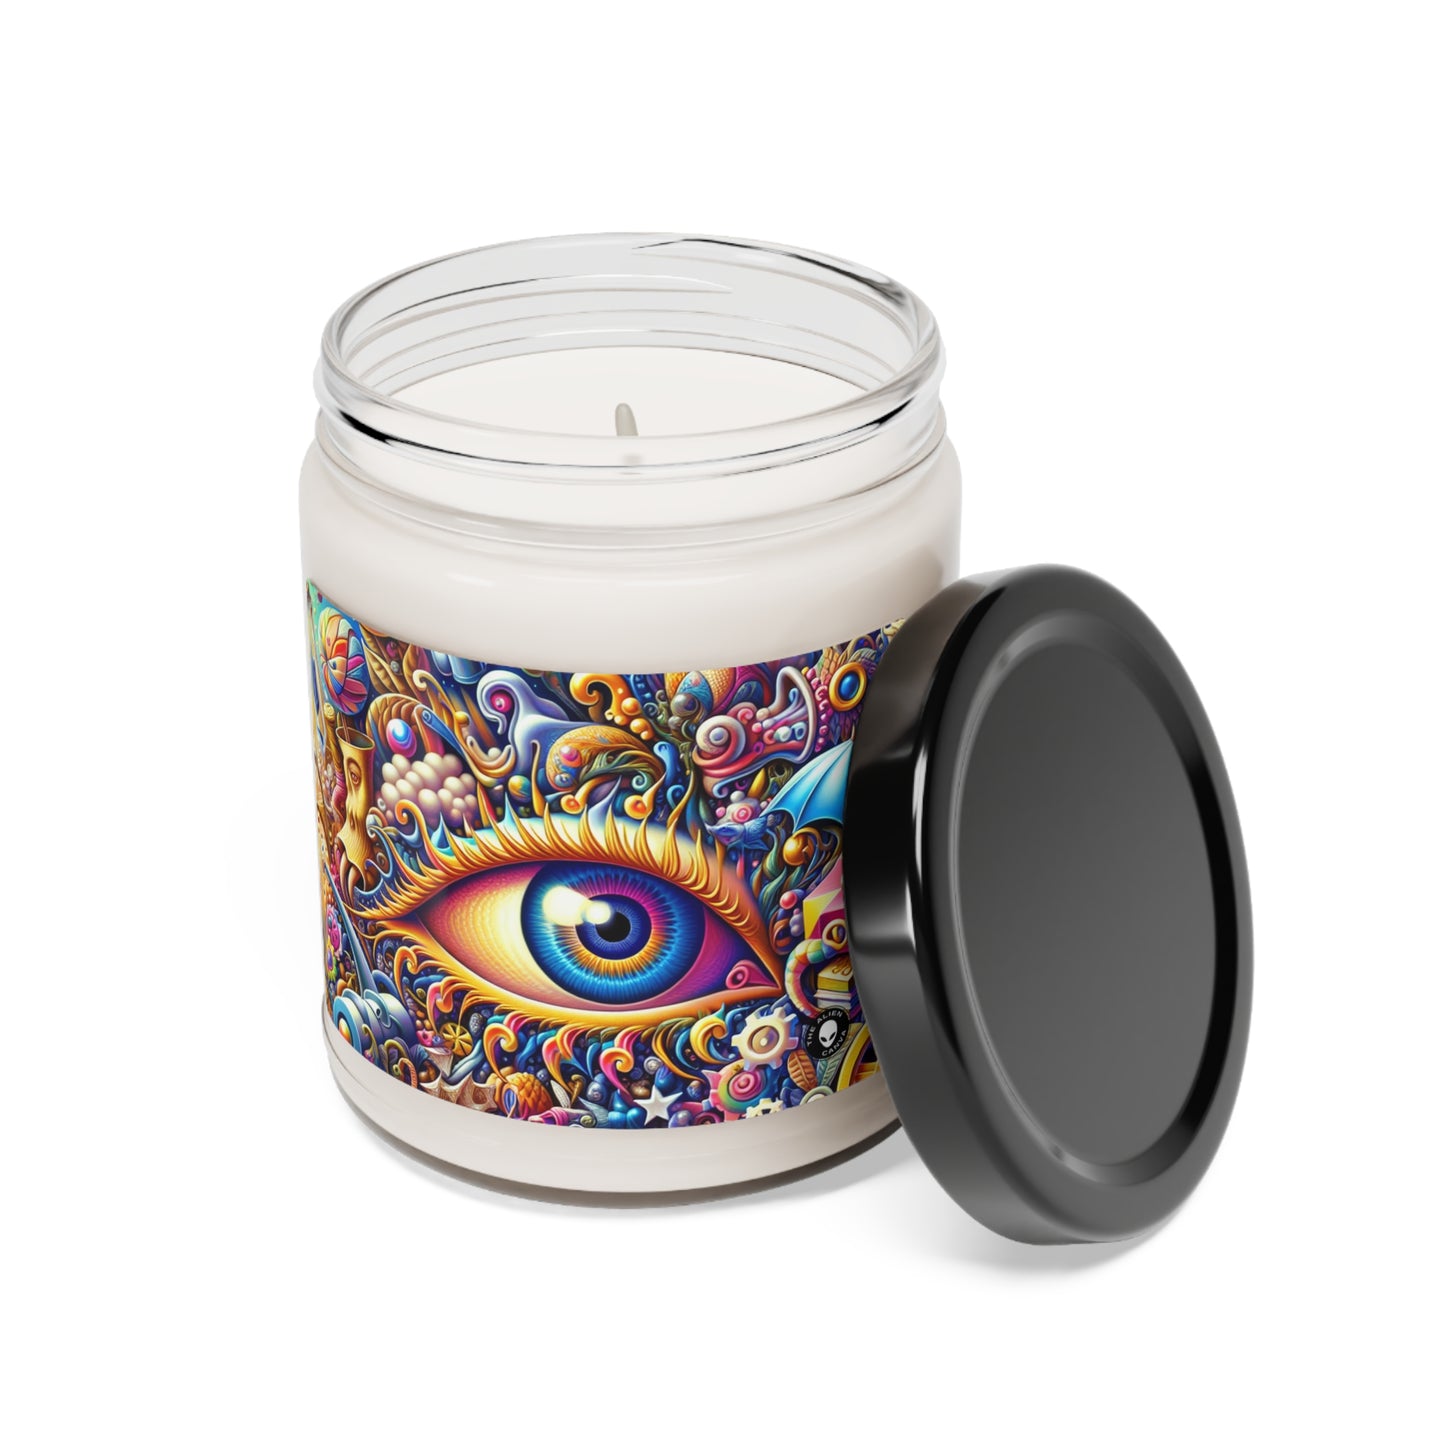 "Cityscape Dreams: A Surreal Night Scene" - The Alien Scented Soy Candle 9oz Magic Realism